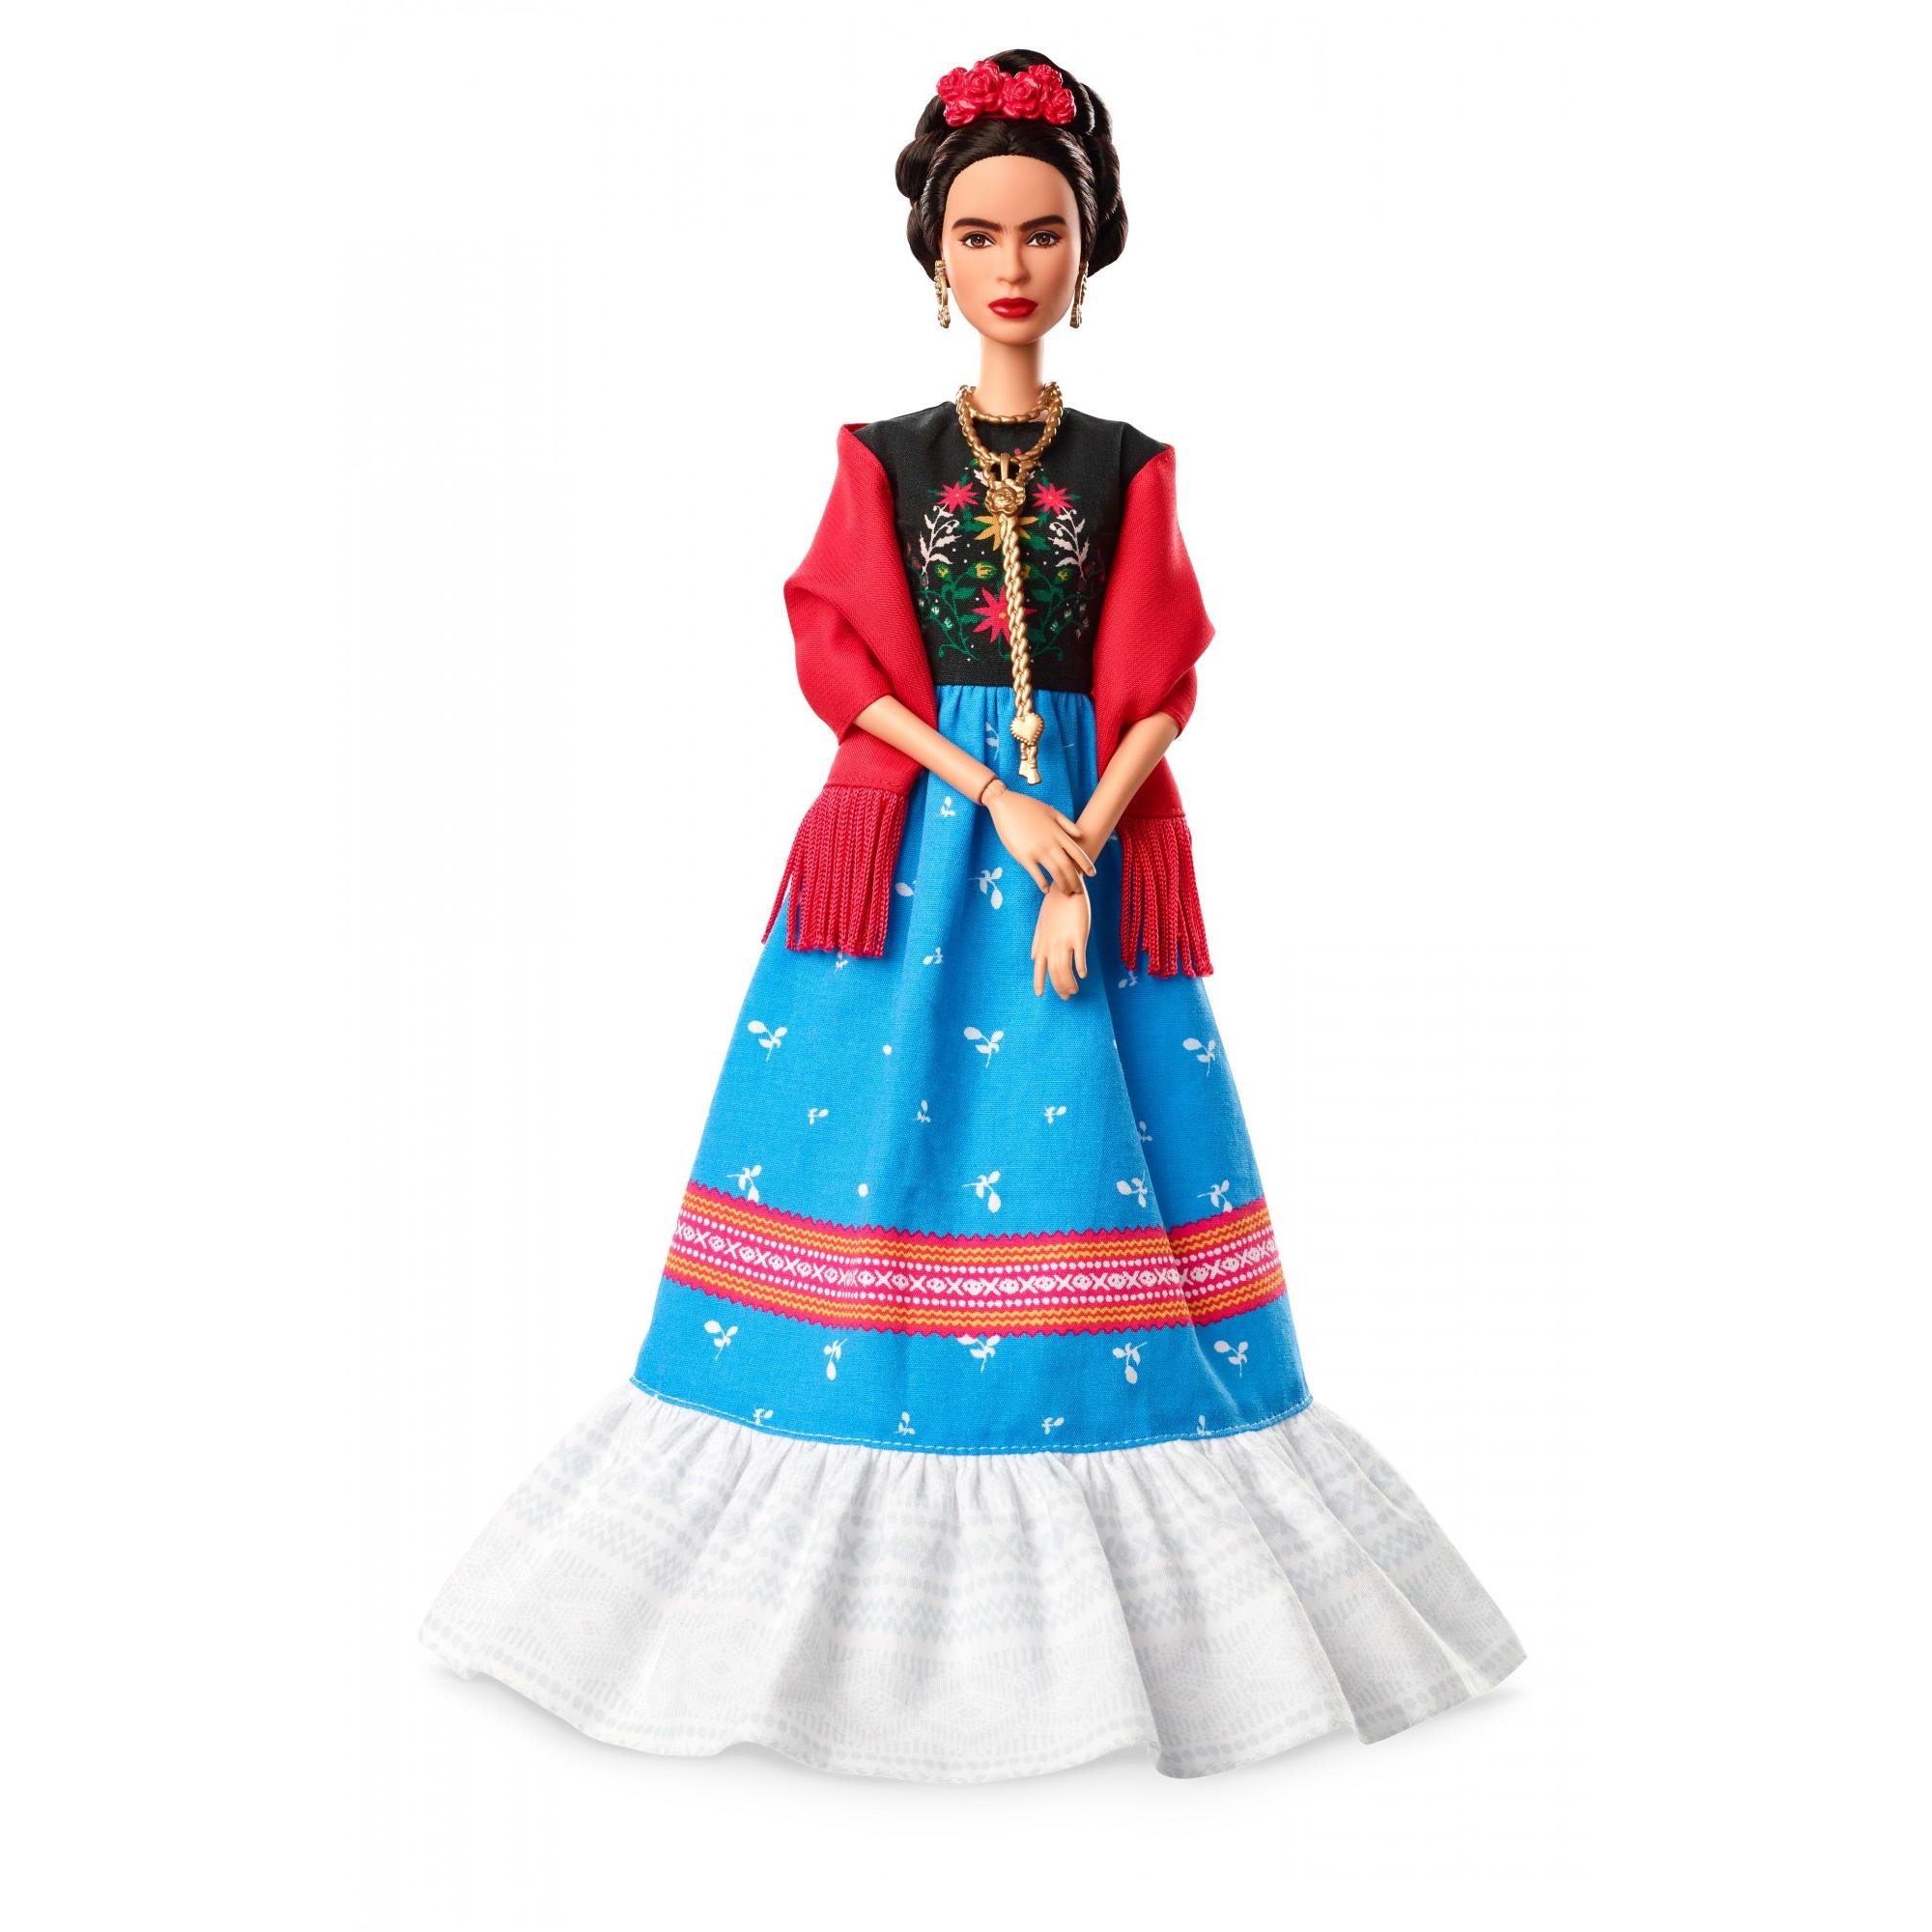 Top 50 Most Beautiful Barbie Doll Images, Hd Wallpaper - Barbie Frida Kahlo , HD Wallpaper & Backgrounds